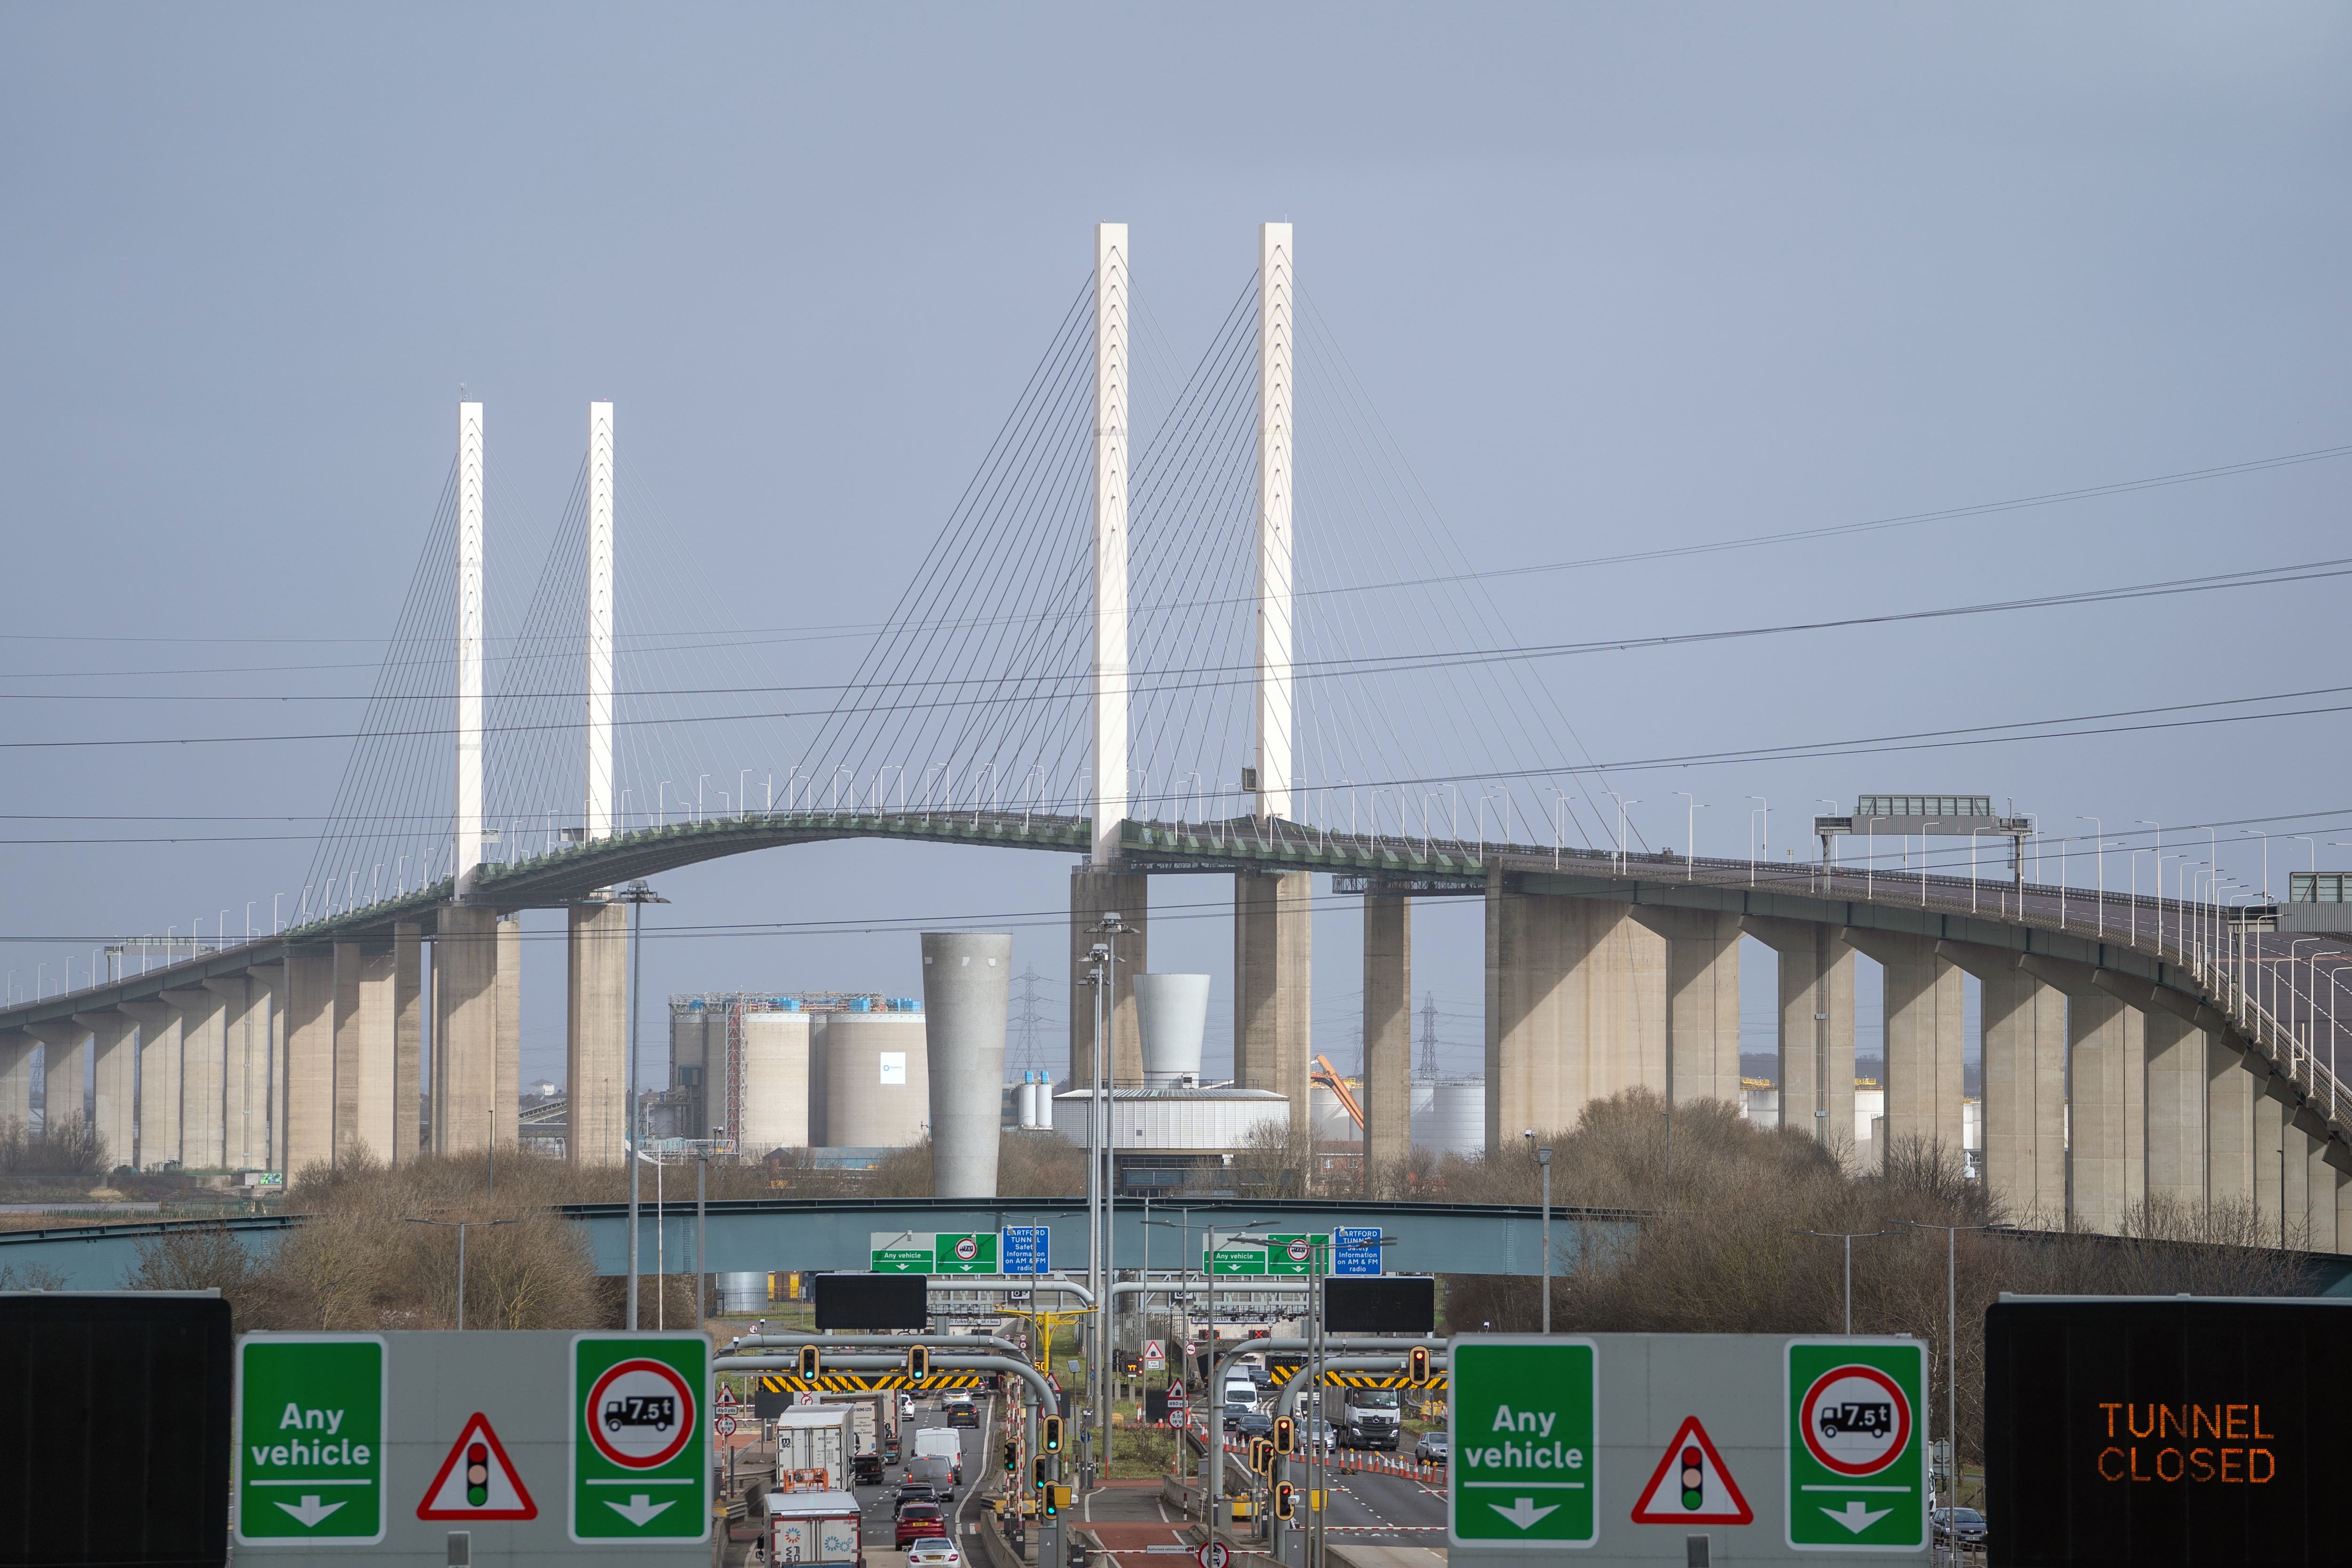 The Queen Elizabeth II bridge at the Dartford Crossing in Kent, which has been closed to all vehicles as Storm Eunice sweeps across the UK after hitting the south coast earlier on Friday. With attractions closing, travel disruption and a major incident declared in some areas, people are warned to stay indoors. A rare red weather warning – the highest alert, meaning a high impact is very likely – has been issued by the Met Office due to the combination of high tides, strong winds and storm surge. Picture date: Friday February 18, 2022.